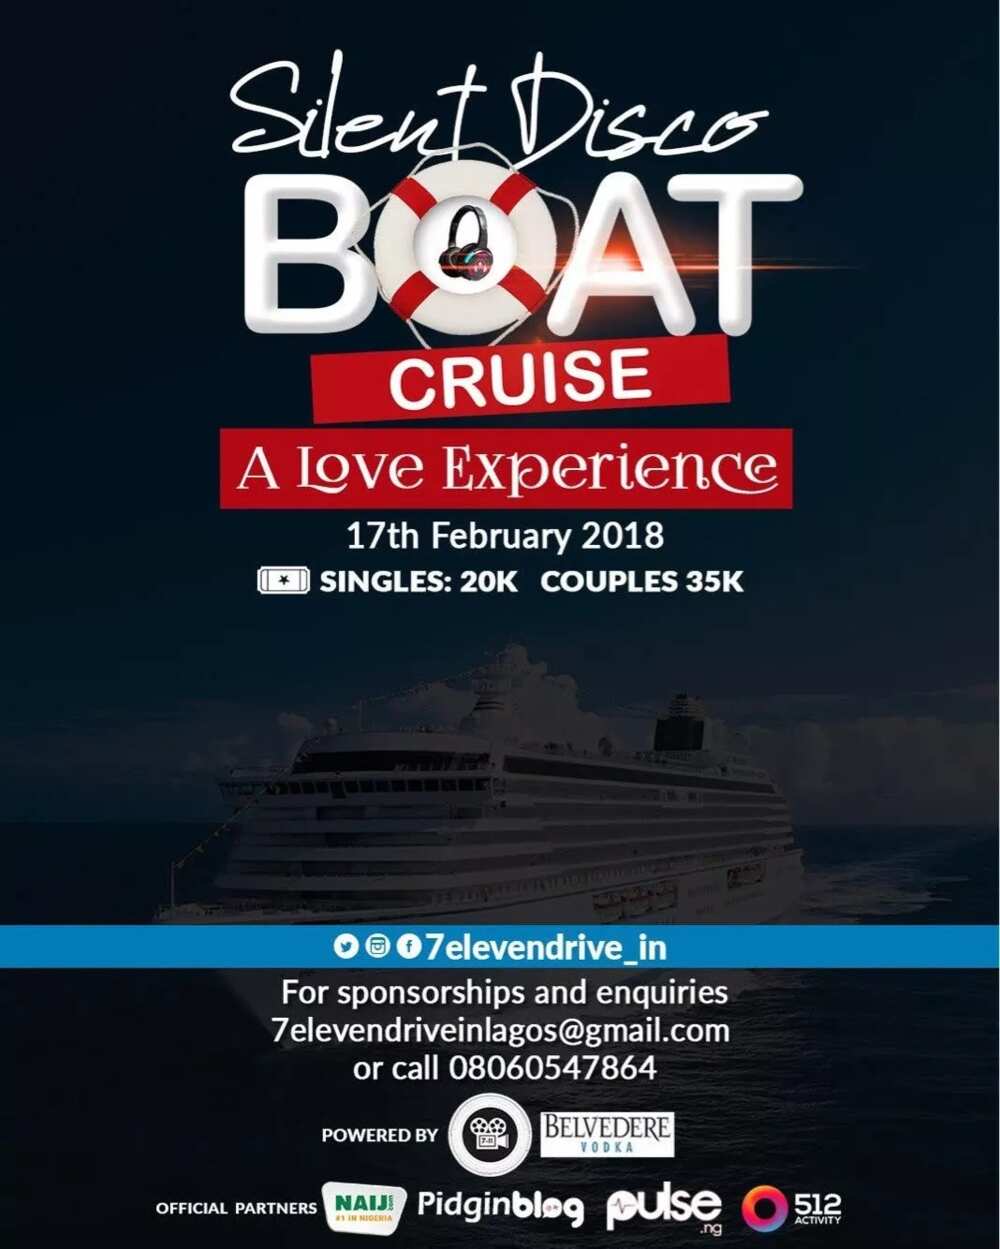 Don't miss the silent disco boat cruise this Valentine